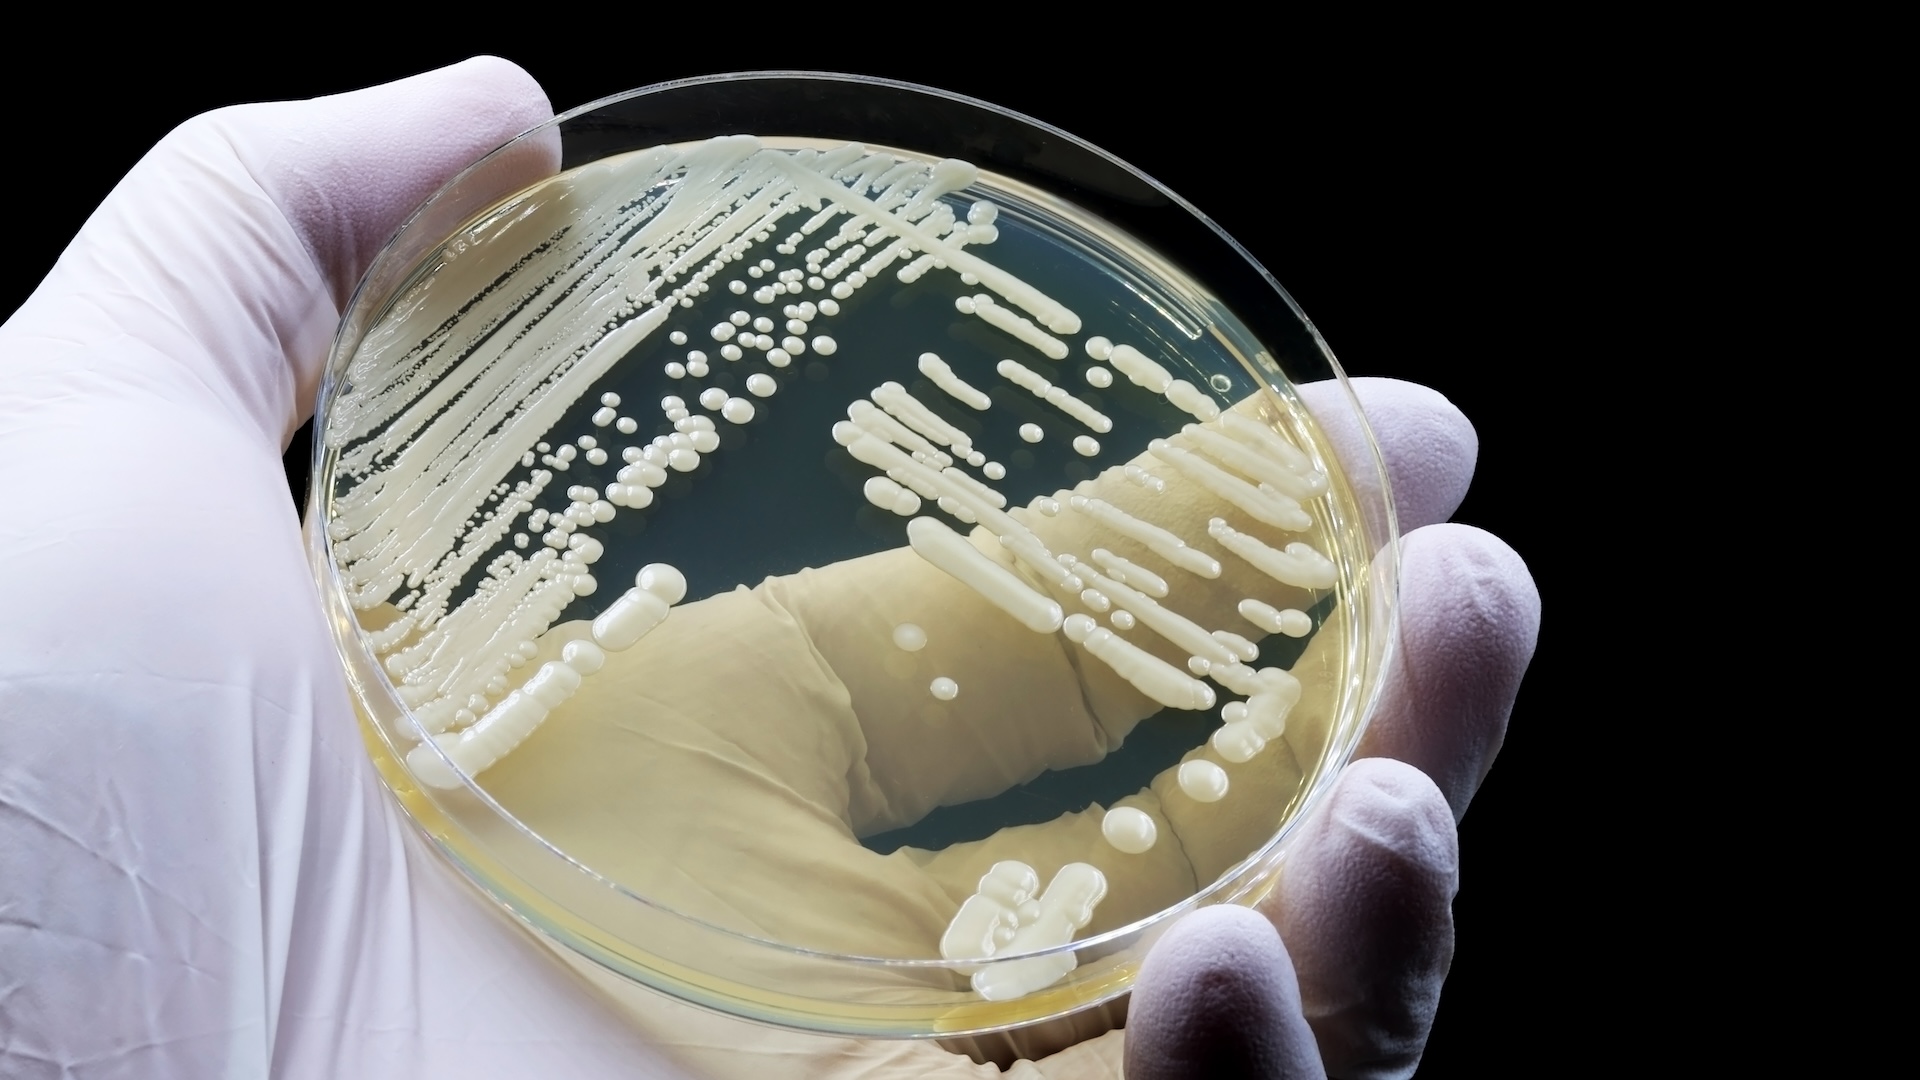  New fungal infection discovered in China 